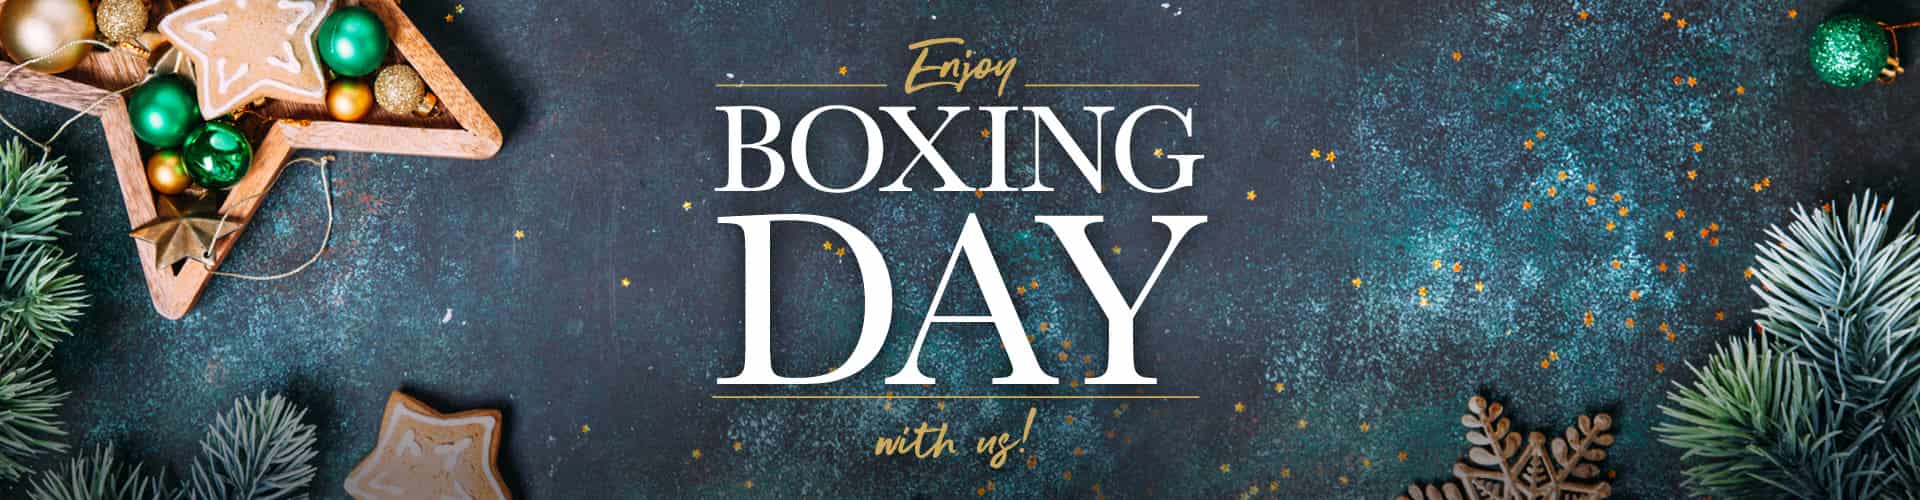 Enjoy Boxing Day with us at The White Lion